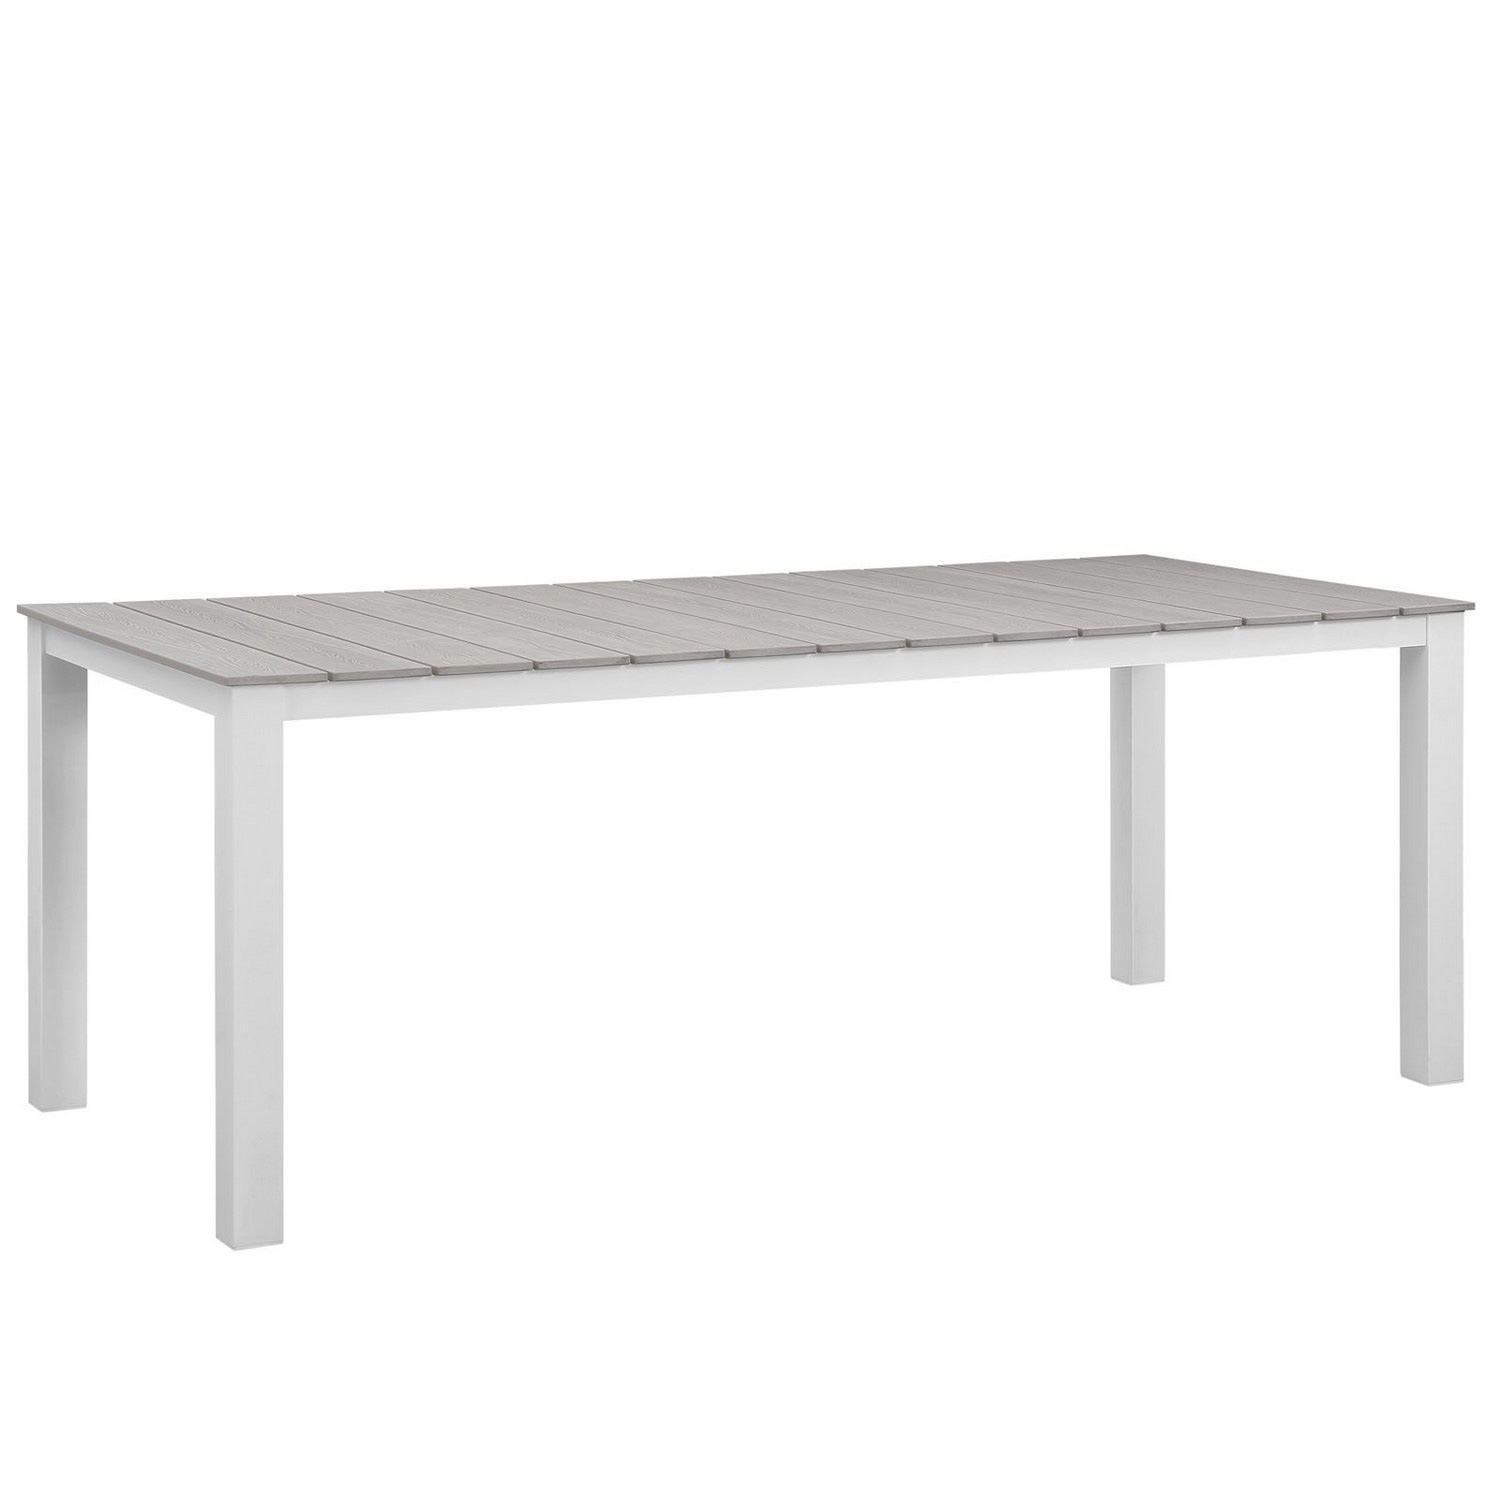 Modway Maine 80 Outdoor Patio Dining Table - White/Light Gray